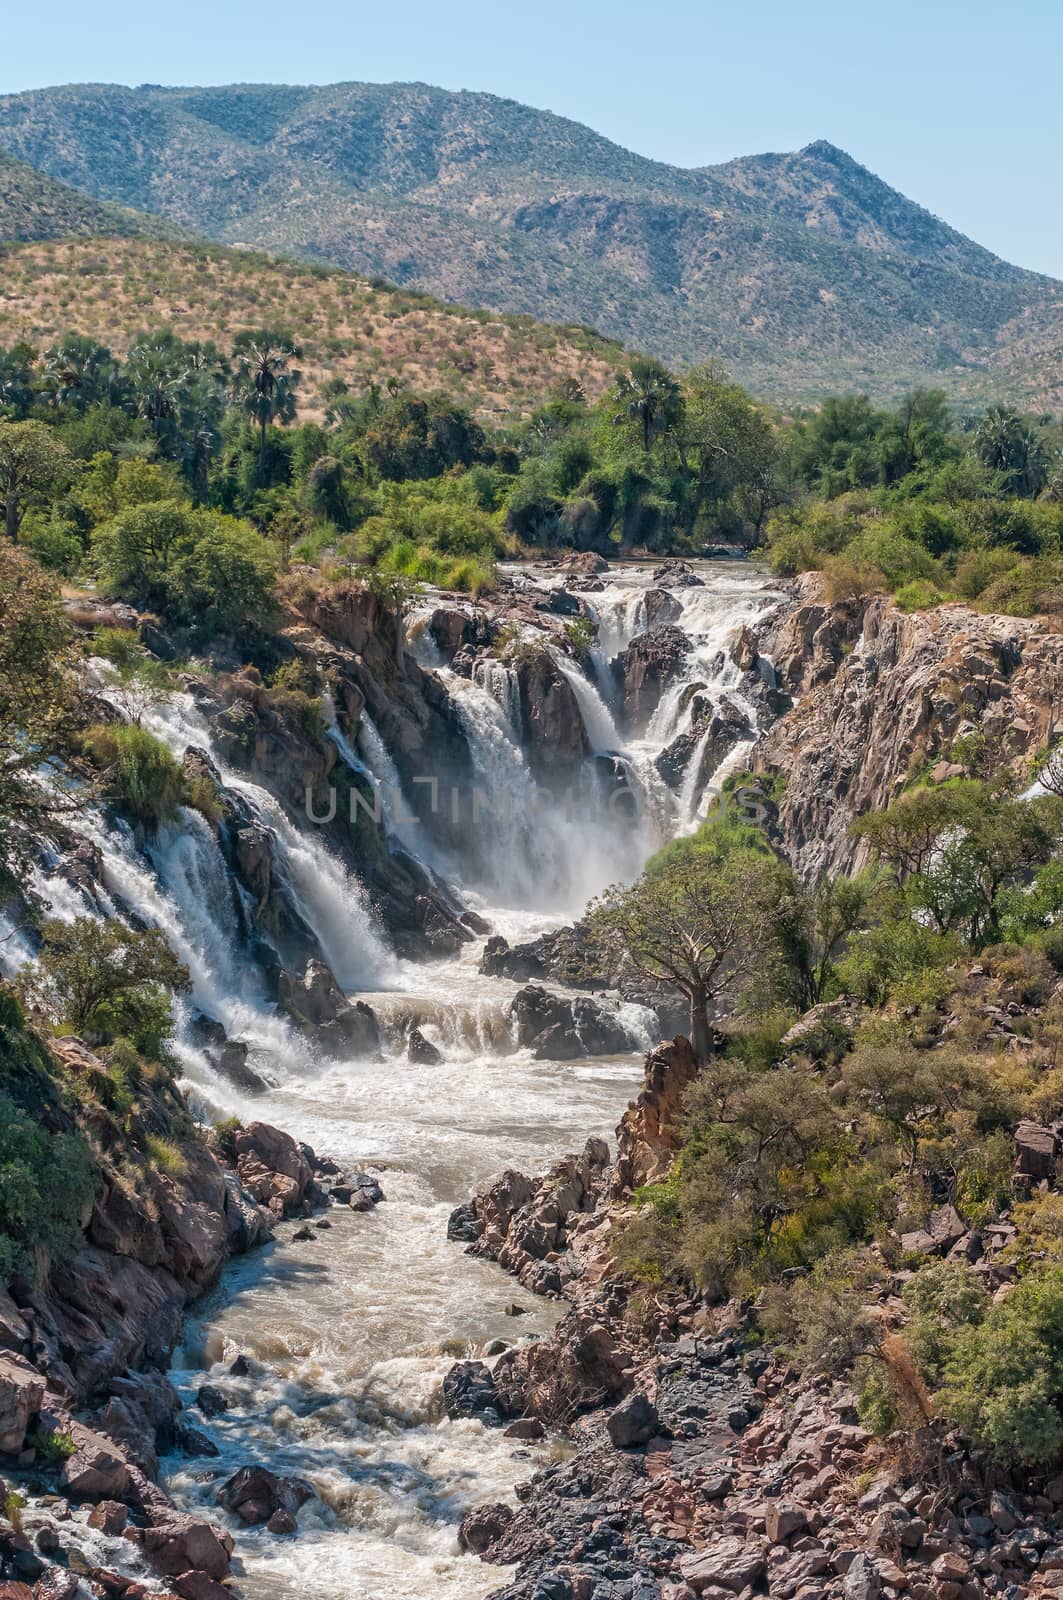 Part of the Epupa waterfalls in the Kunene River. Baobab and makalani palm trees are visible